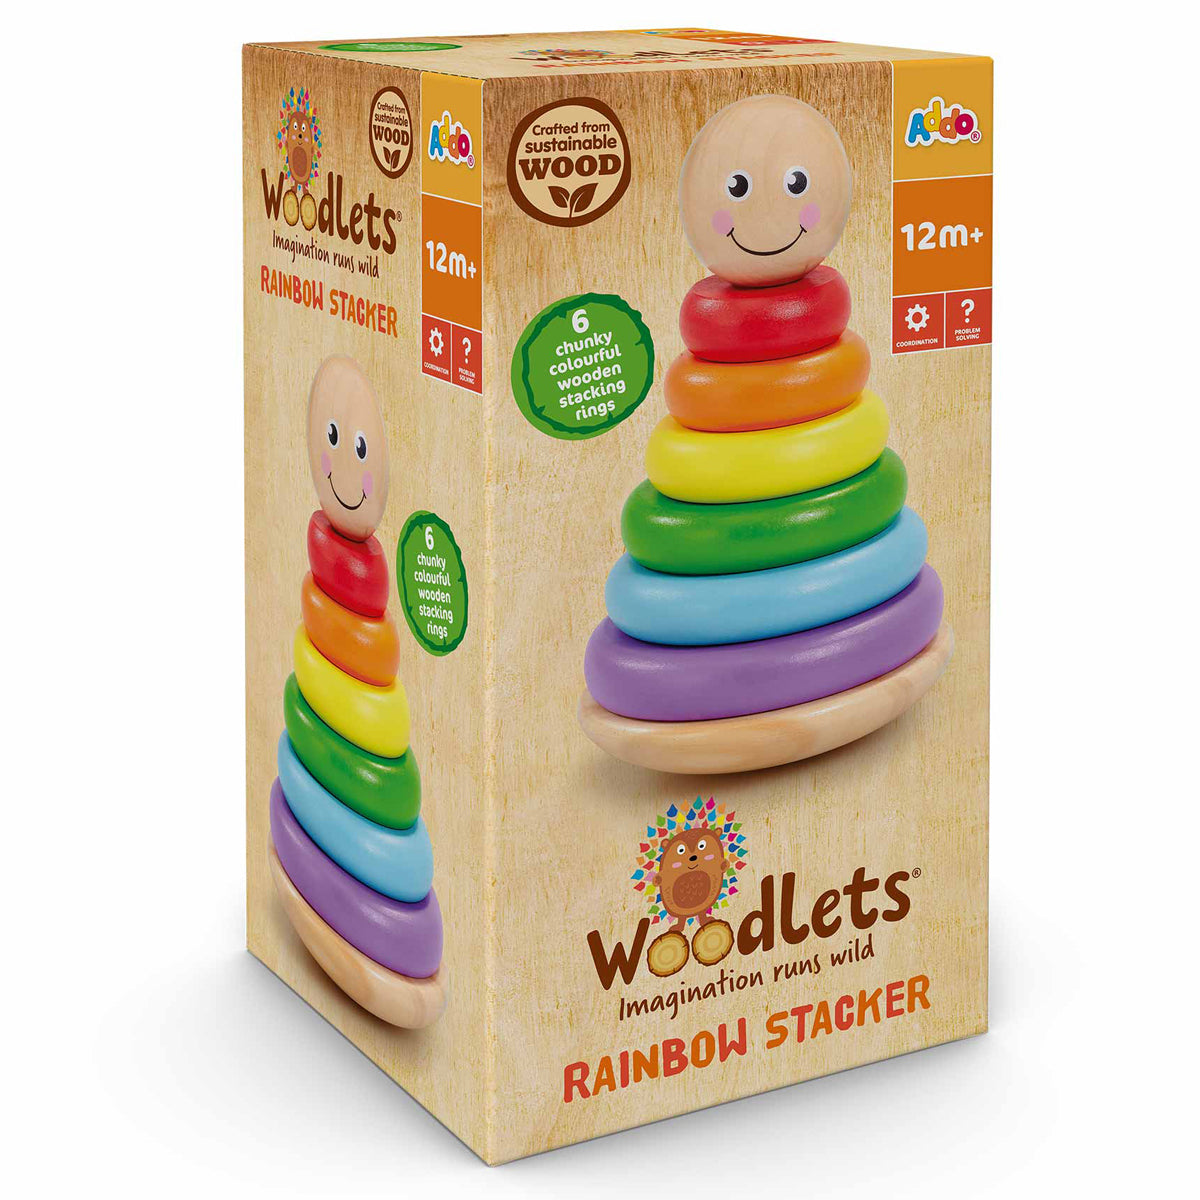 Woodlets Rainbow Stacker Toy